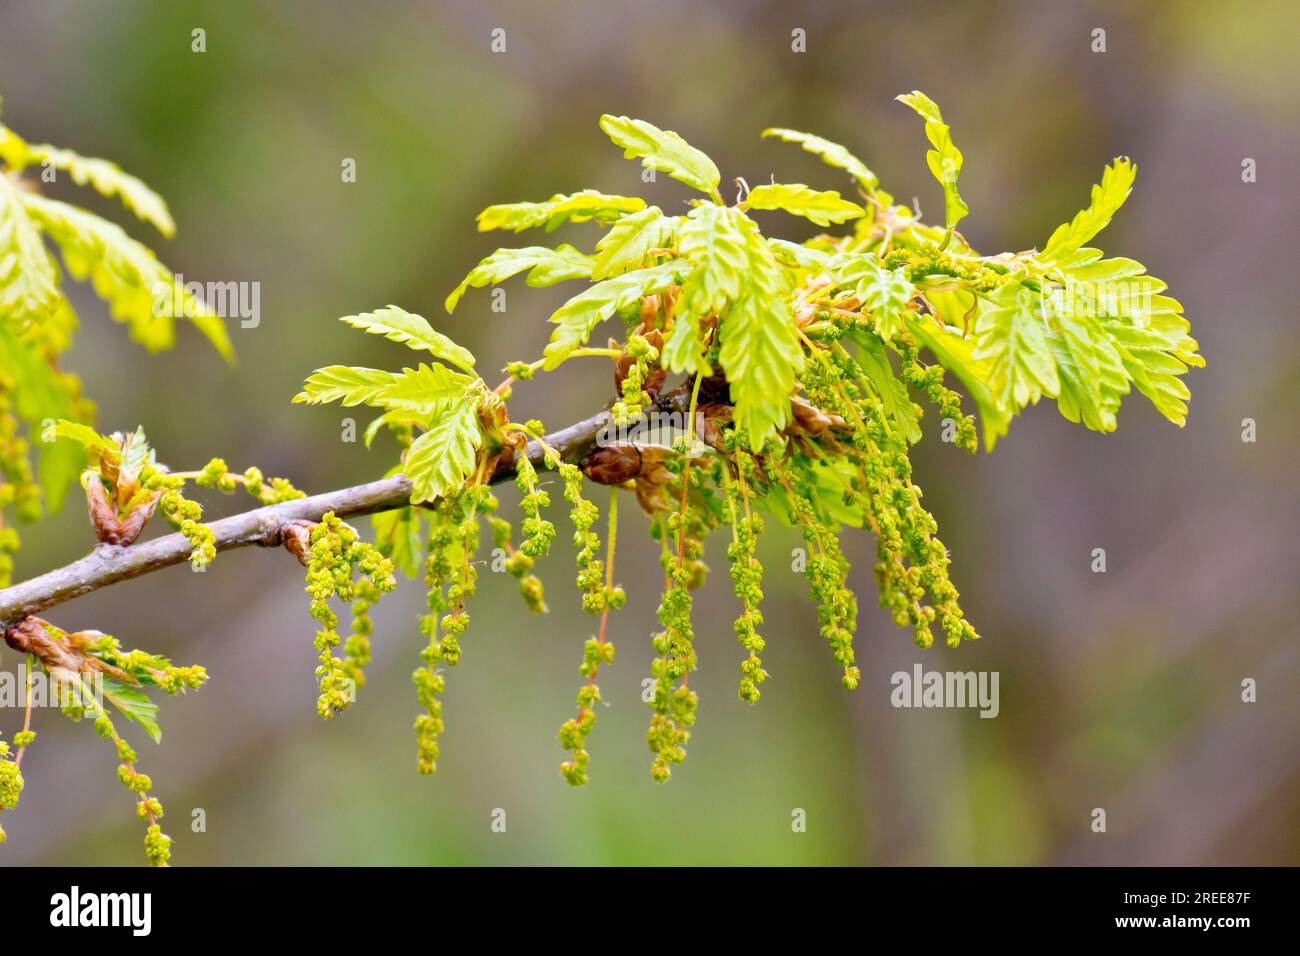 Oak (quercus), close up of the flowers or catkins produced by oak trees in the spring, isolated from the background. Stock Photo